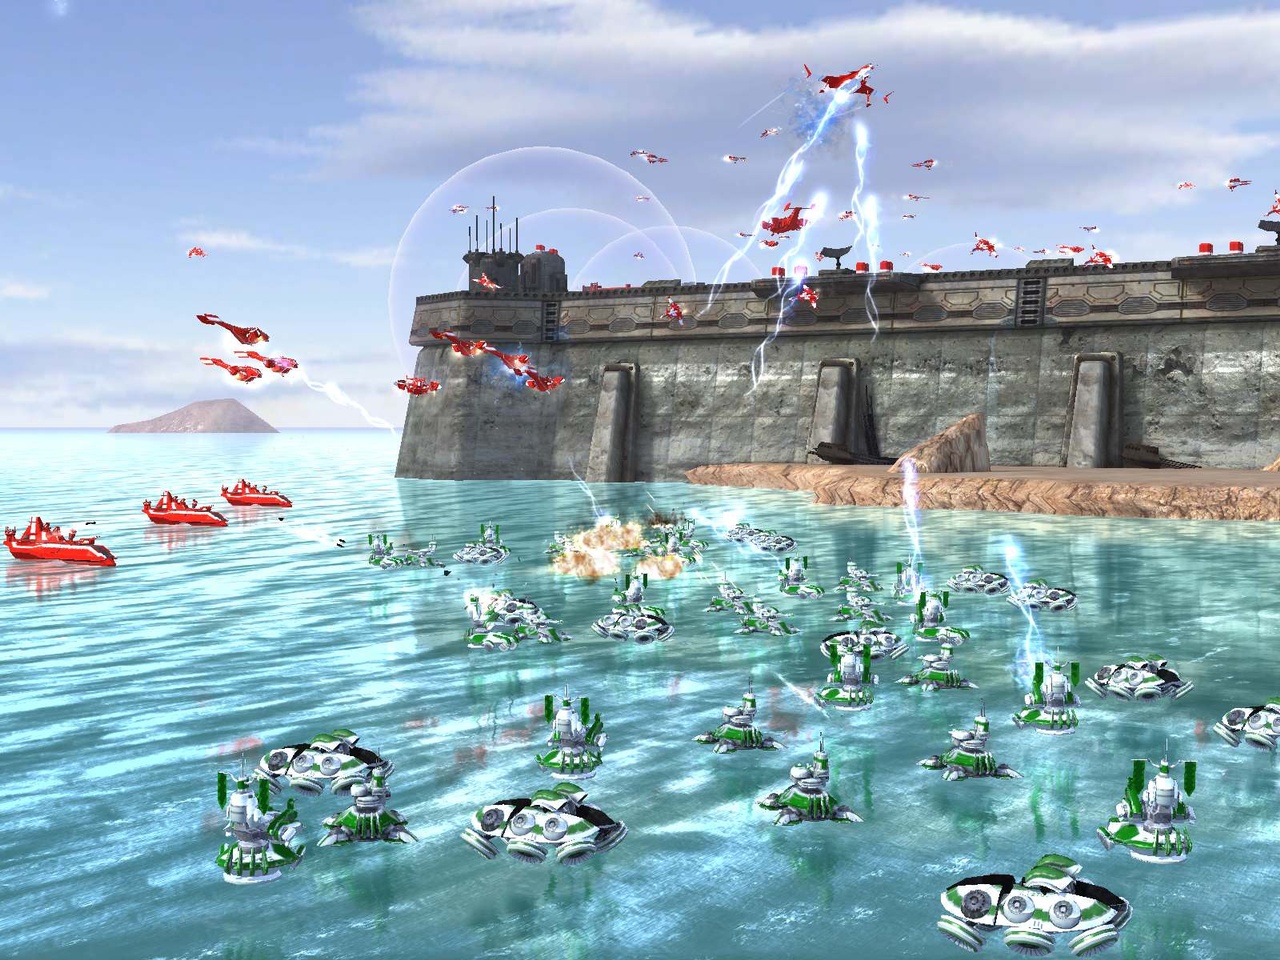 Expect to see all-new land-sea-air conflicts in Supreme Commander 2.